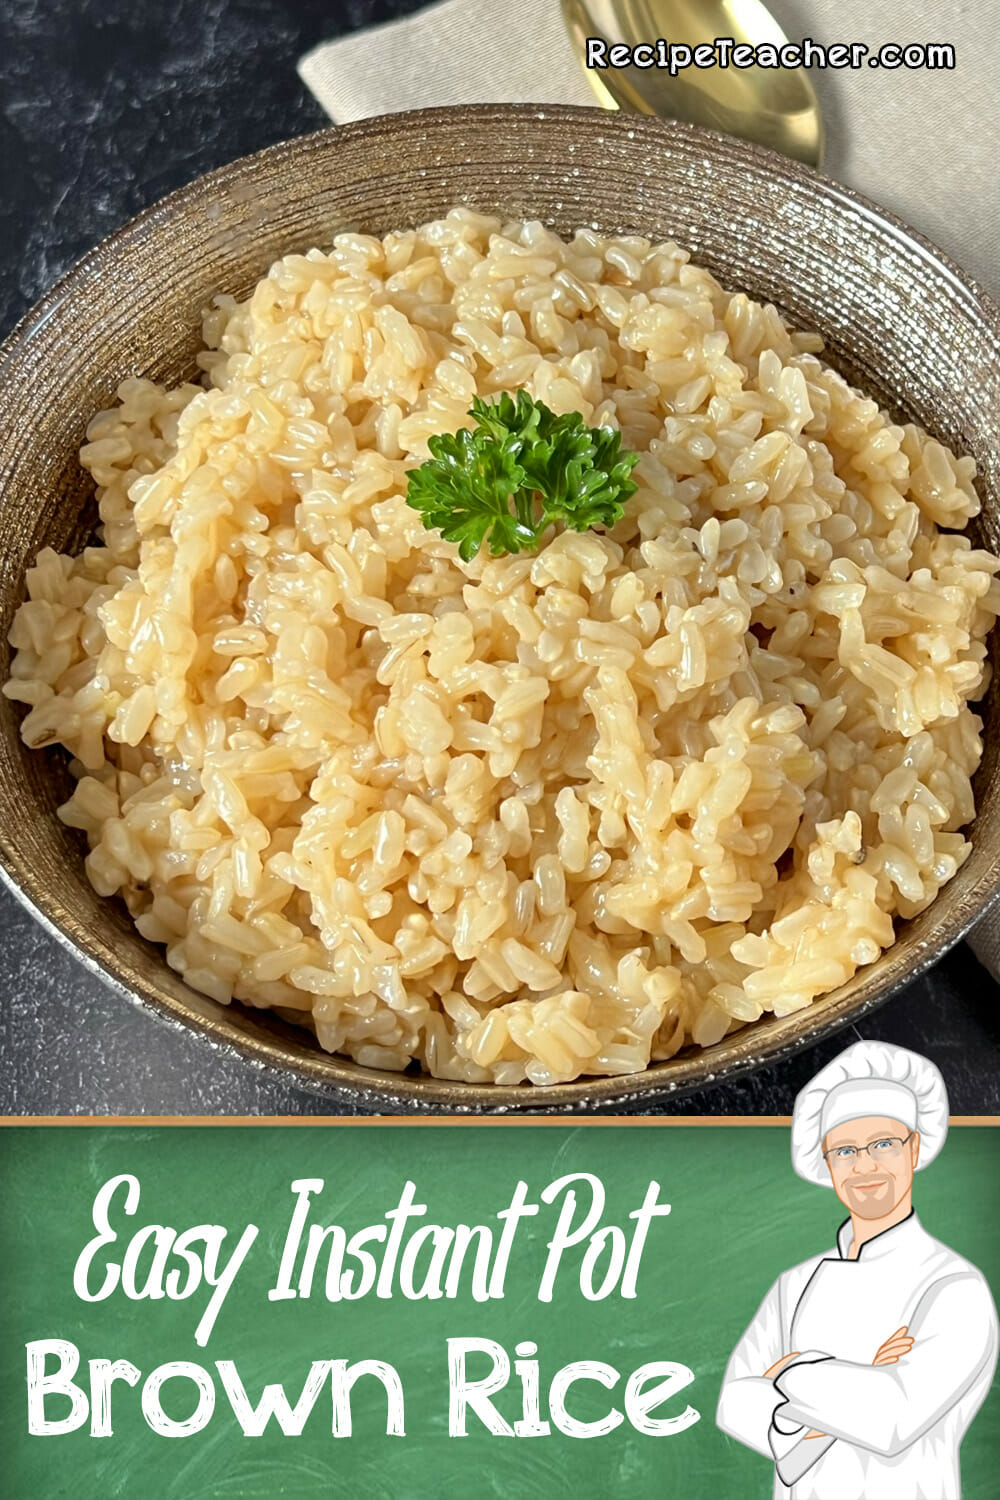 Recipe for Instant Pot brown rice